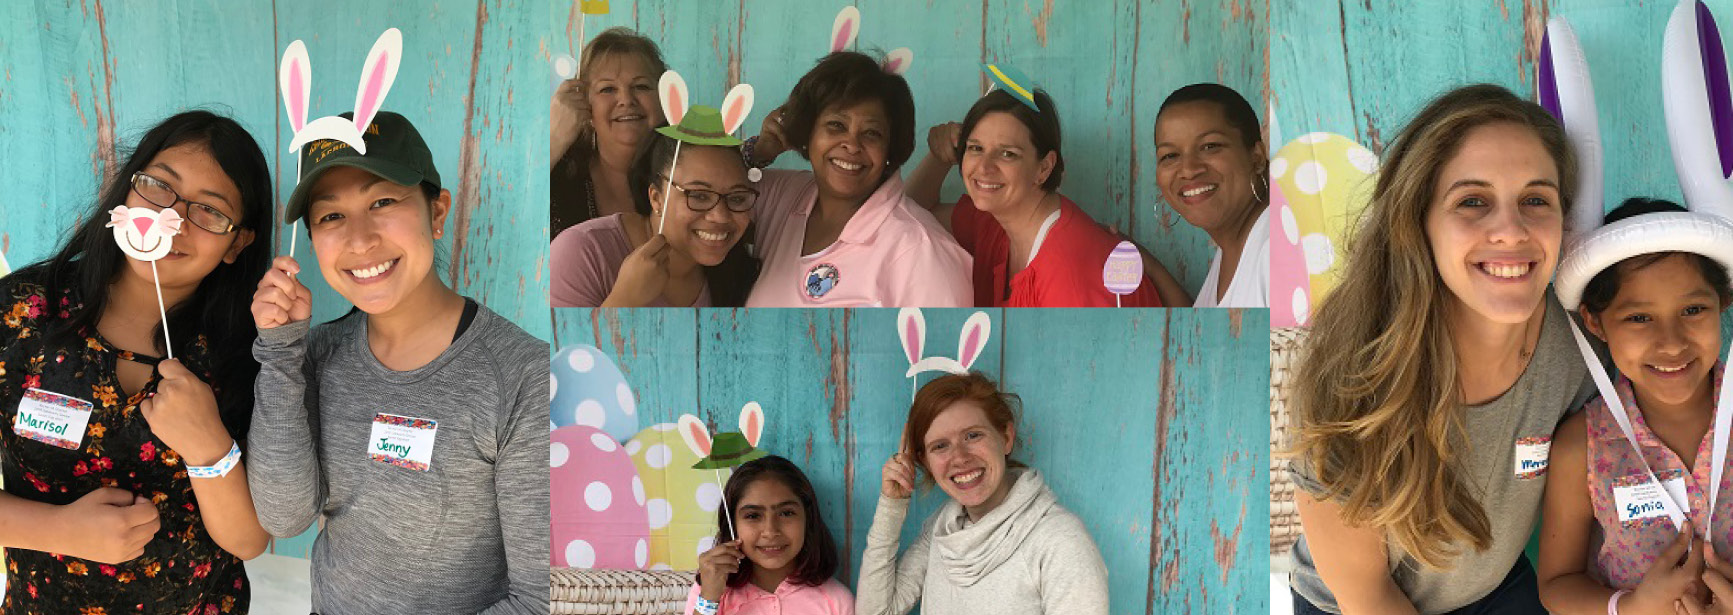 BeFriend-A-Child Easter activity collage of group photos